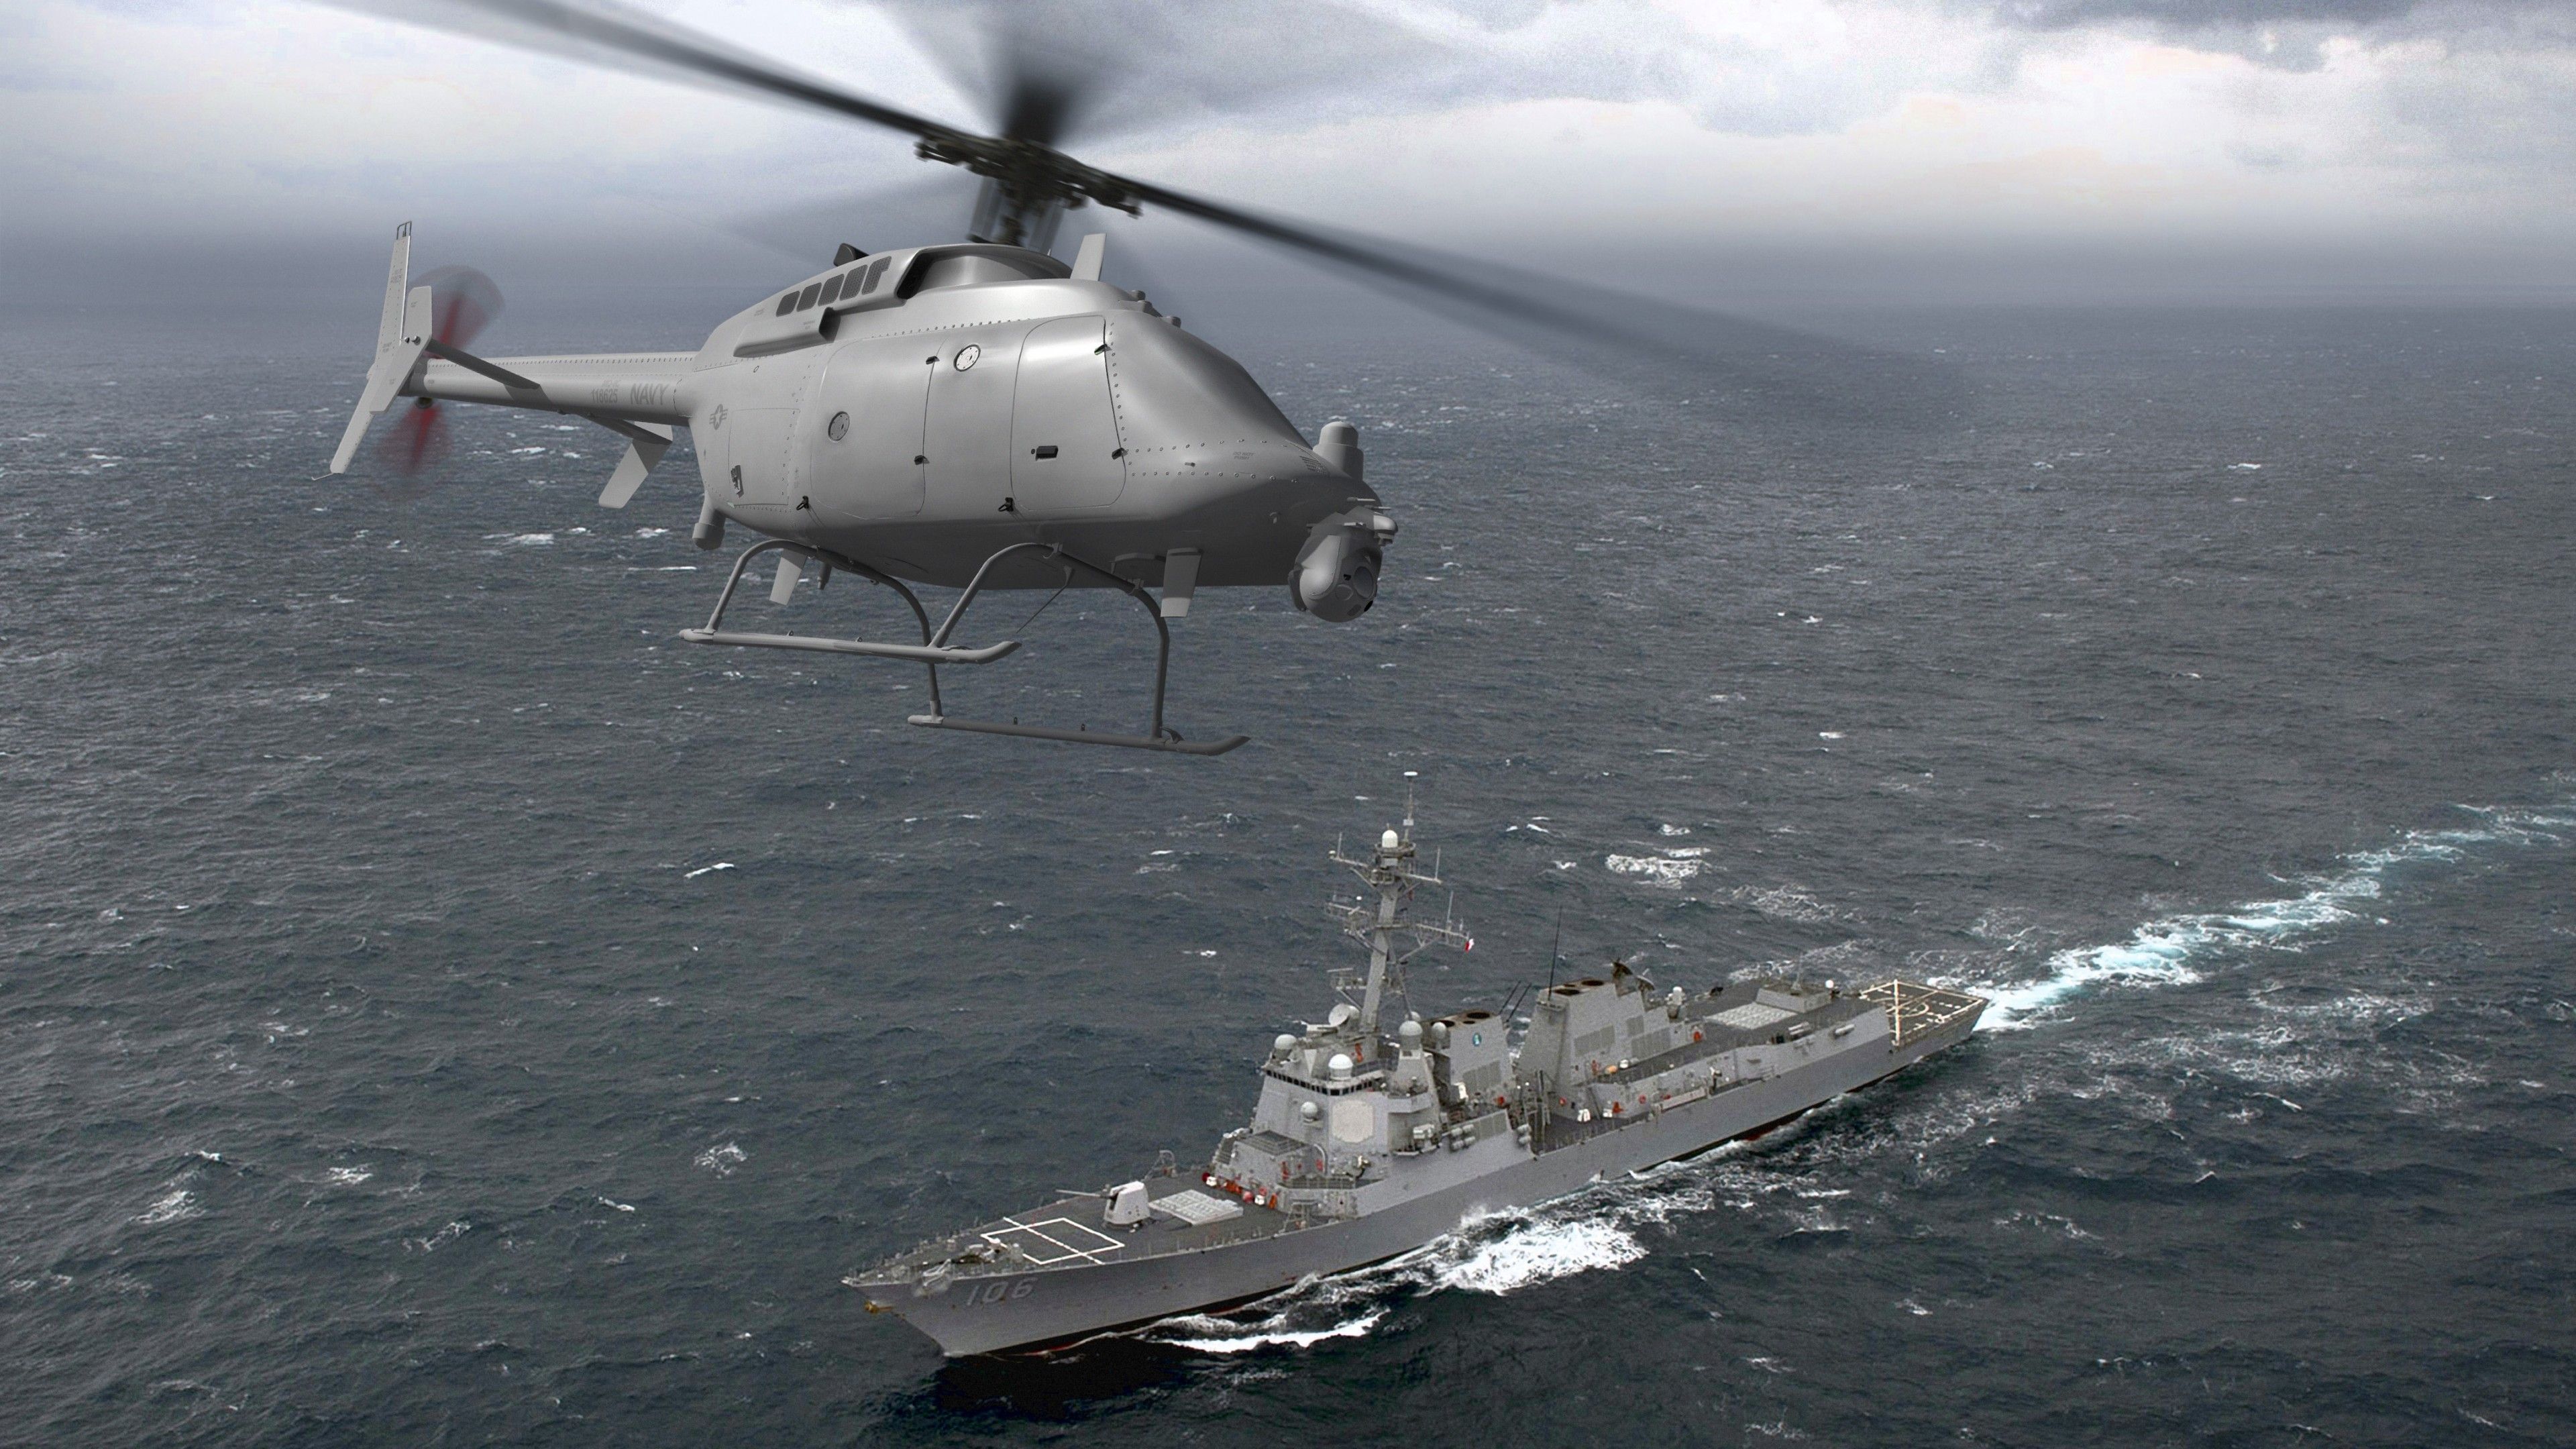 Wallpaper DDG MQ 8C Fire Scout, Helicopter, Drone, US Army, U.S. Air Force, Military